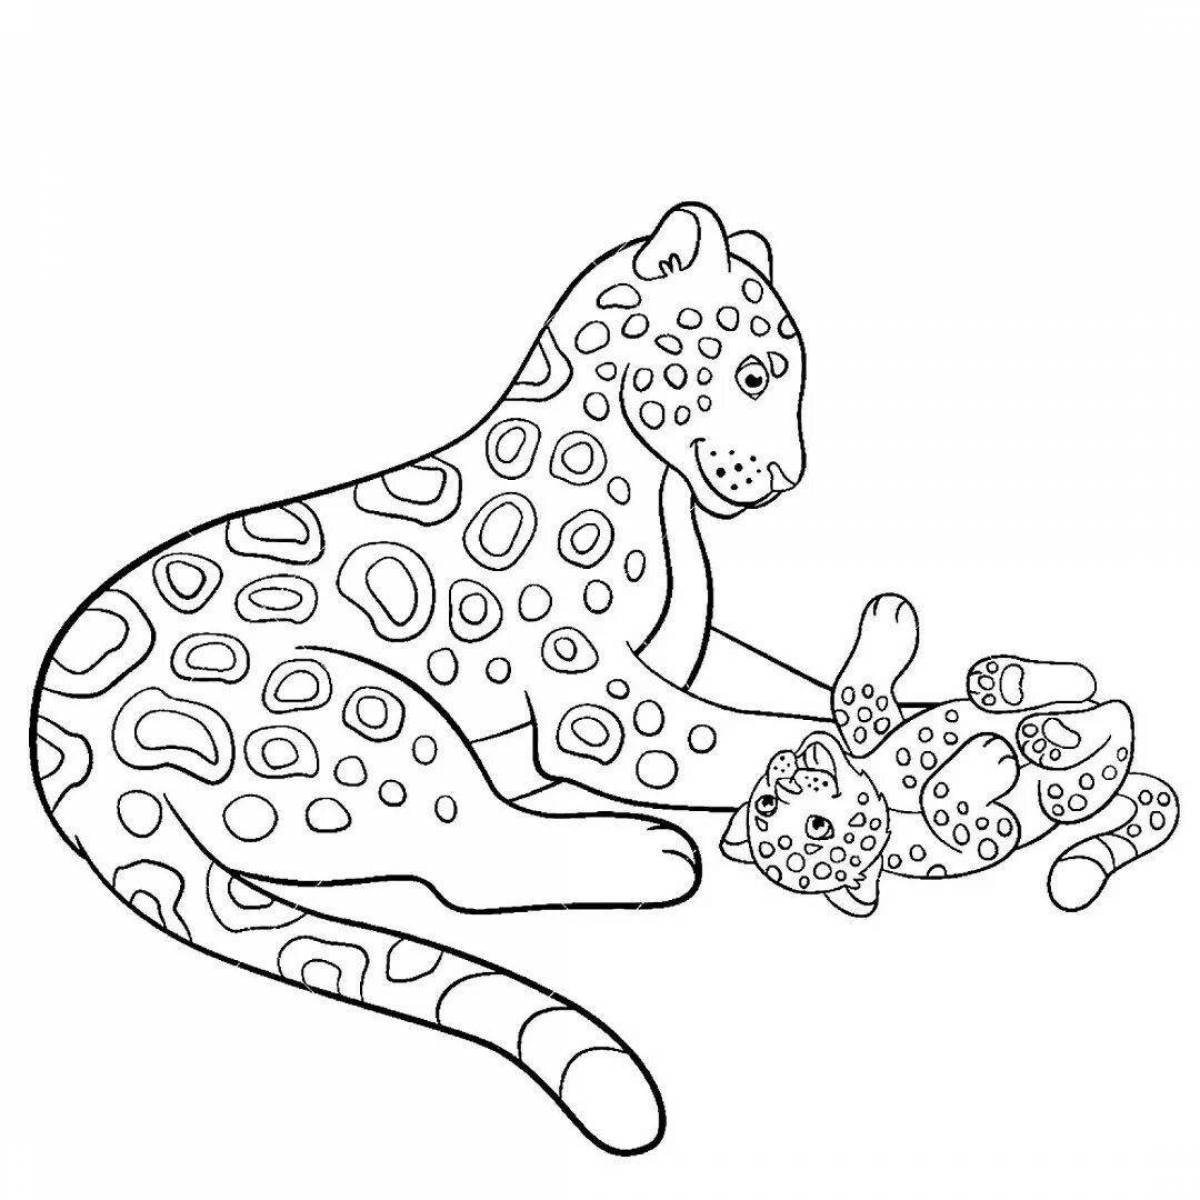 Intriguing leopard print coloring book for 5-6 year olds